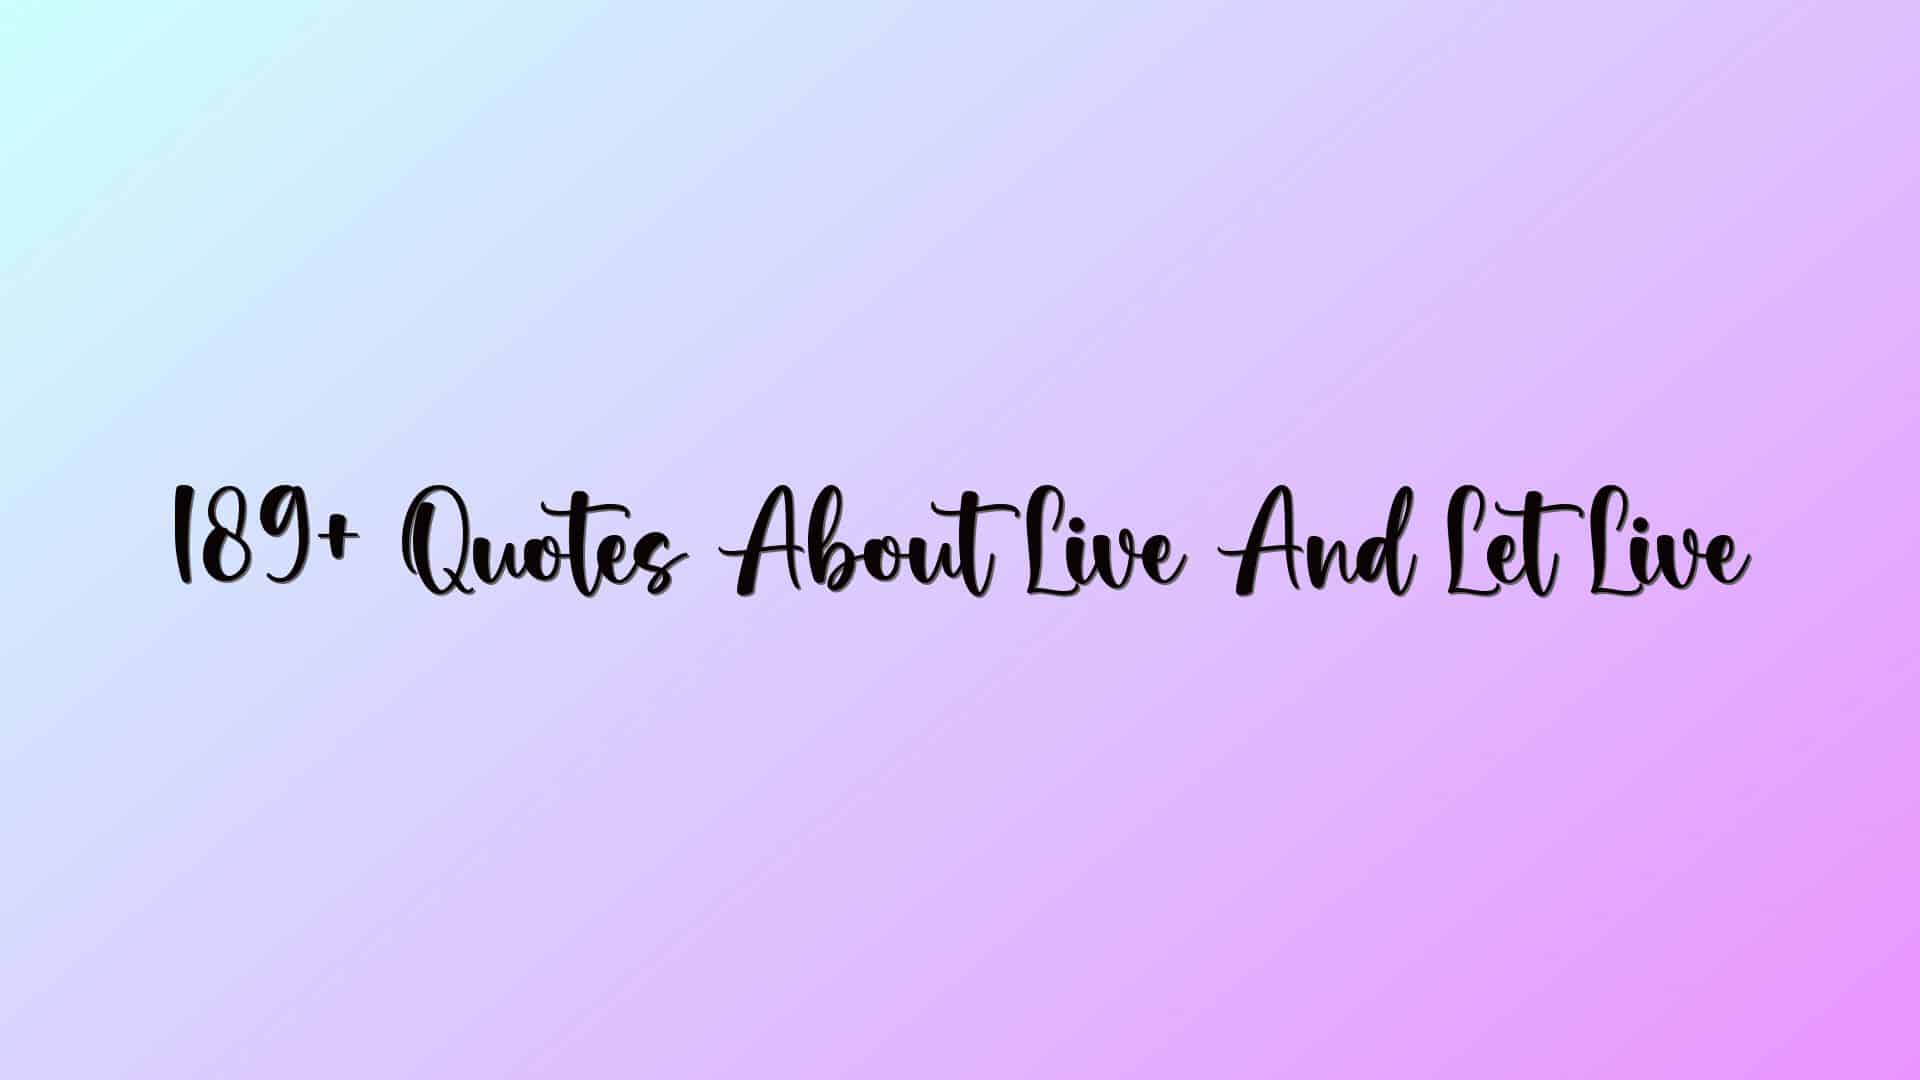 189+ Quotes About Live And Let Live